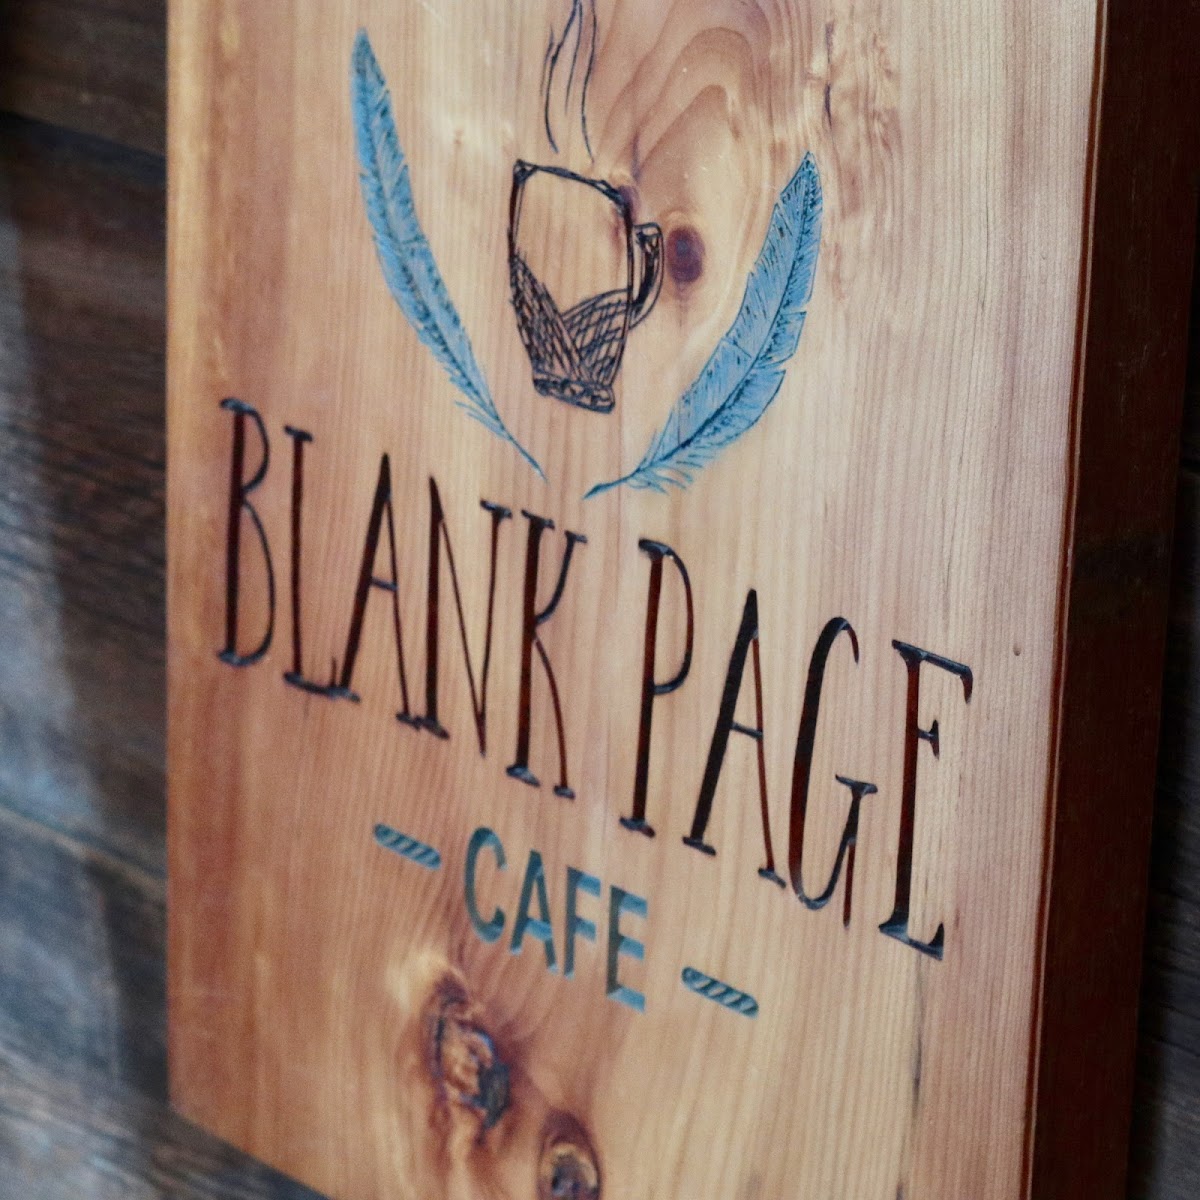 Gluten-Free at Blank Page Cafe @ Bread & Butter Farm